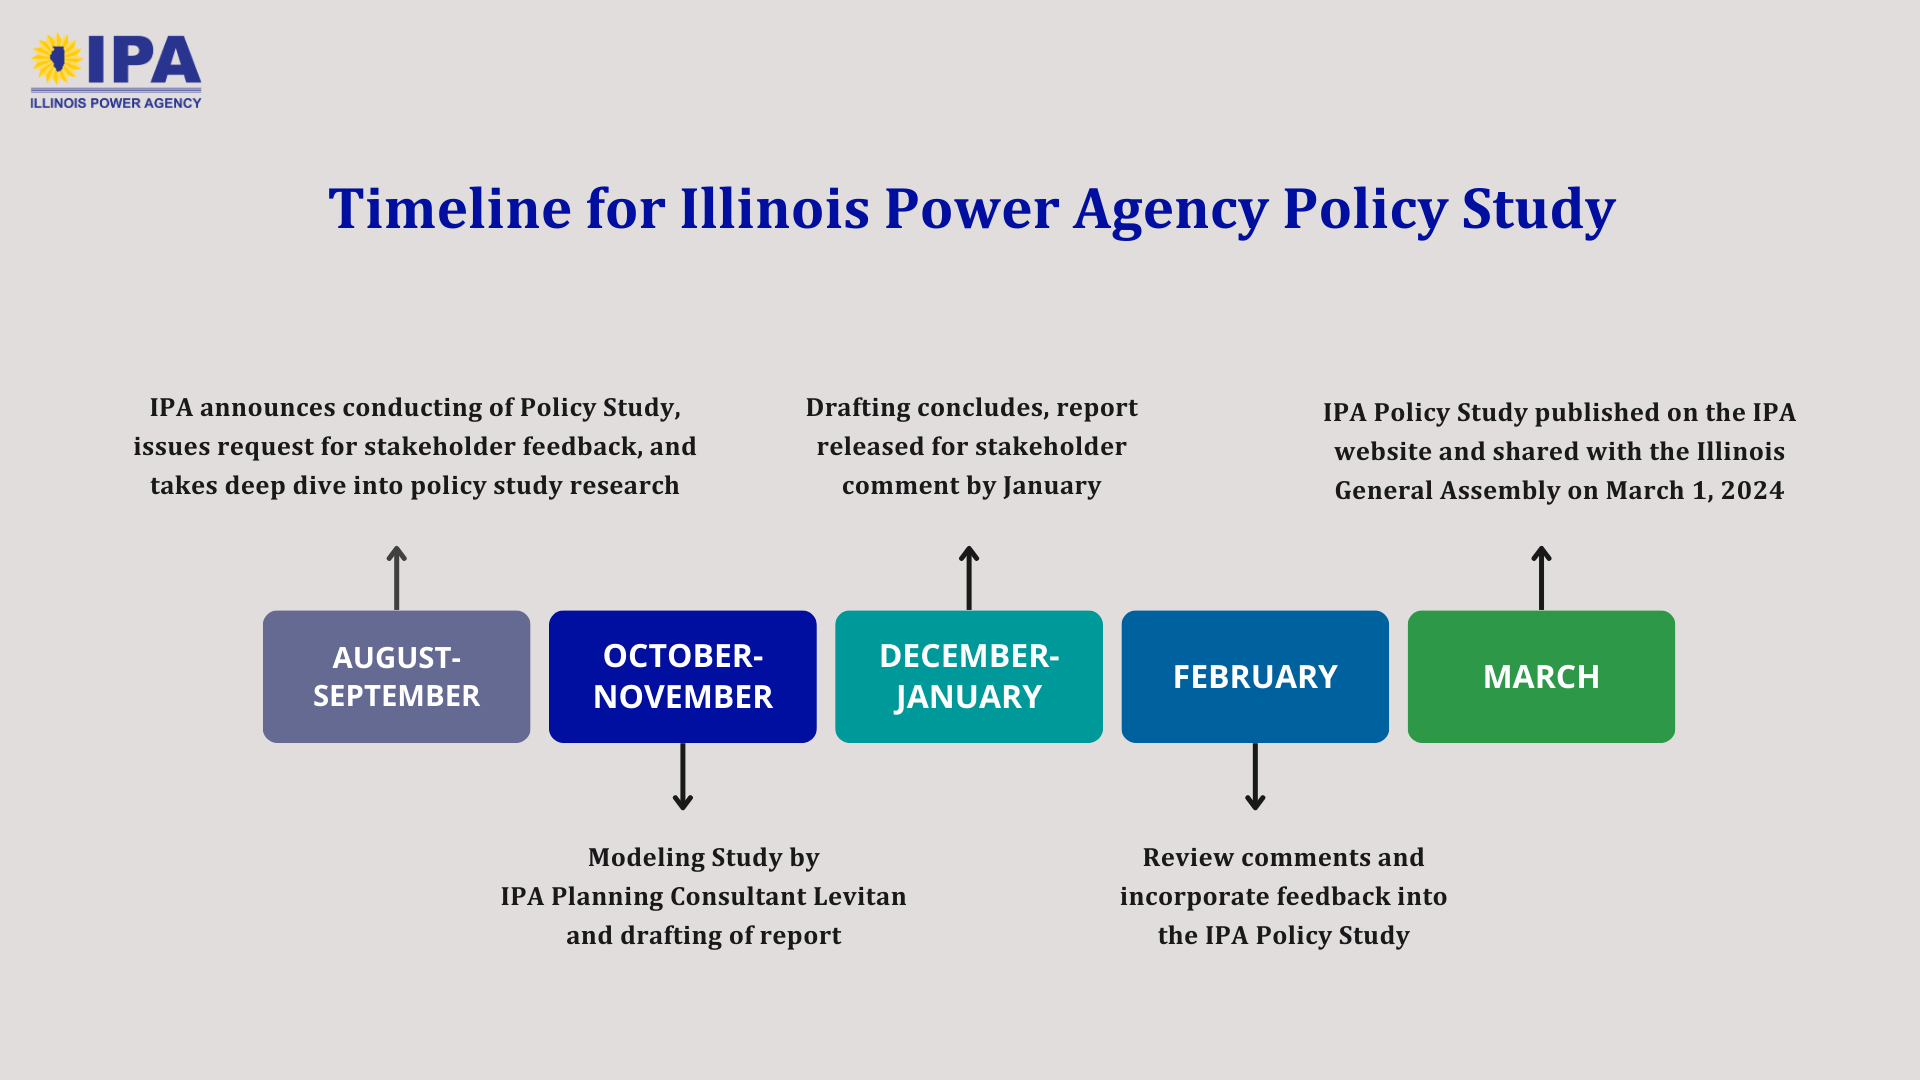 IPA Policy Study Timeline v6b - Color Test - Timeline/Cycle